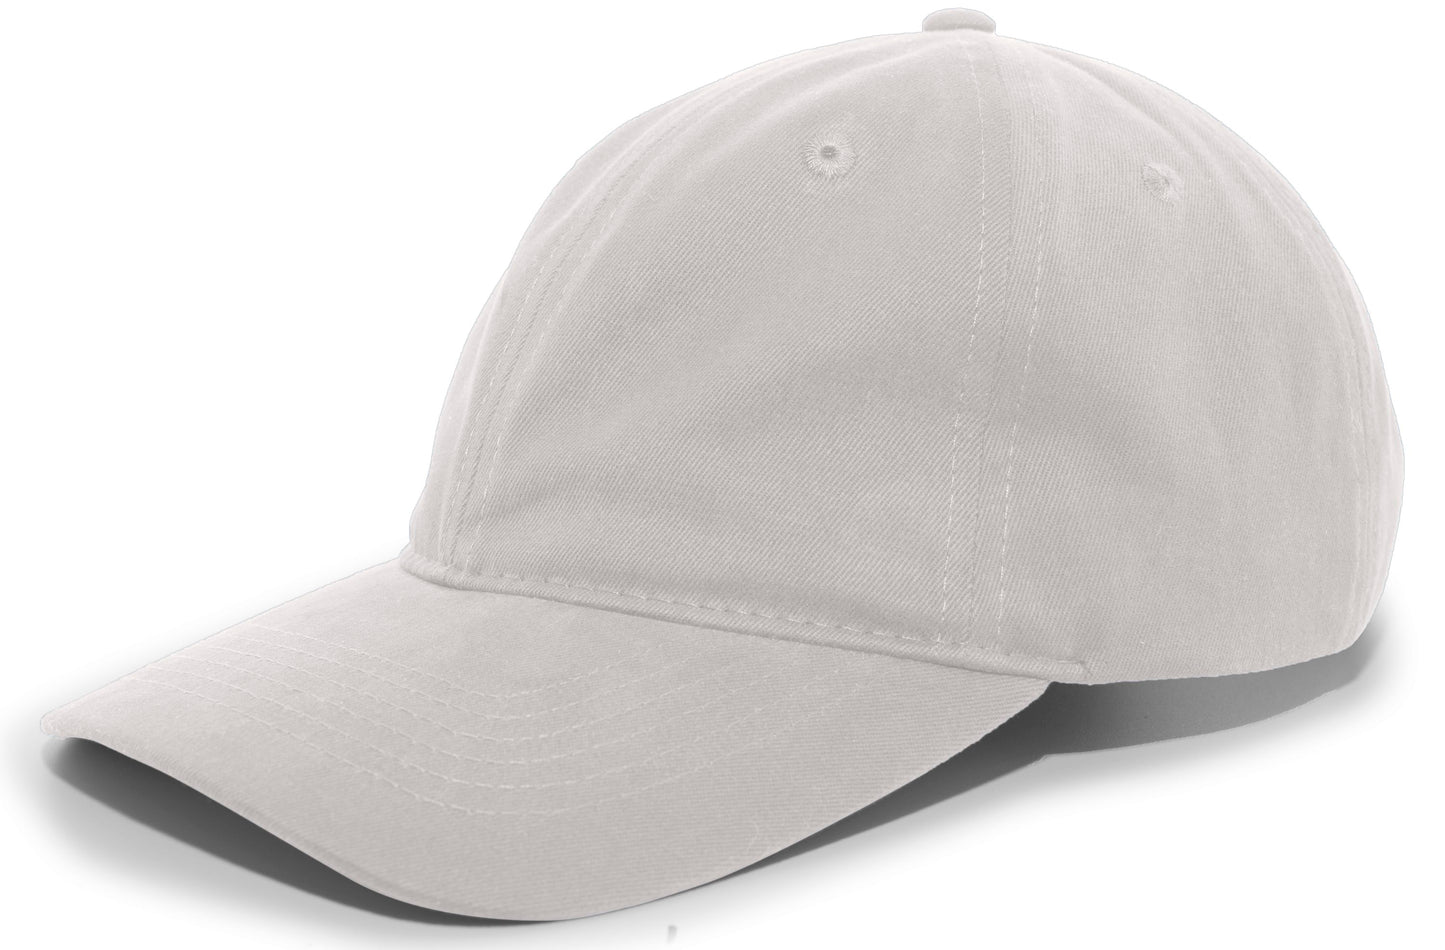 PACIFIC HEADWEAR - BRUSHED COTTON TWILL BUCKLE STRAP ADJUSTABLE CAP - 201C